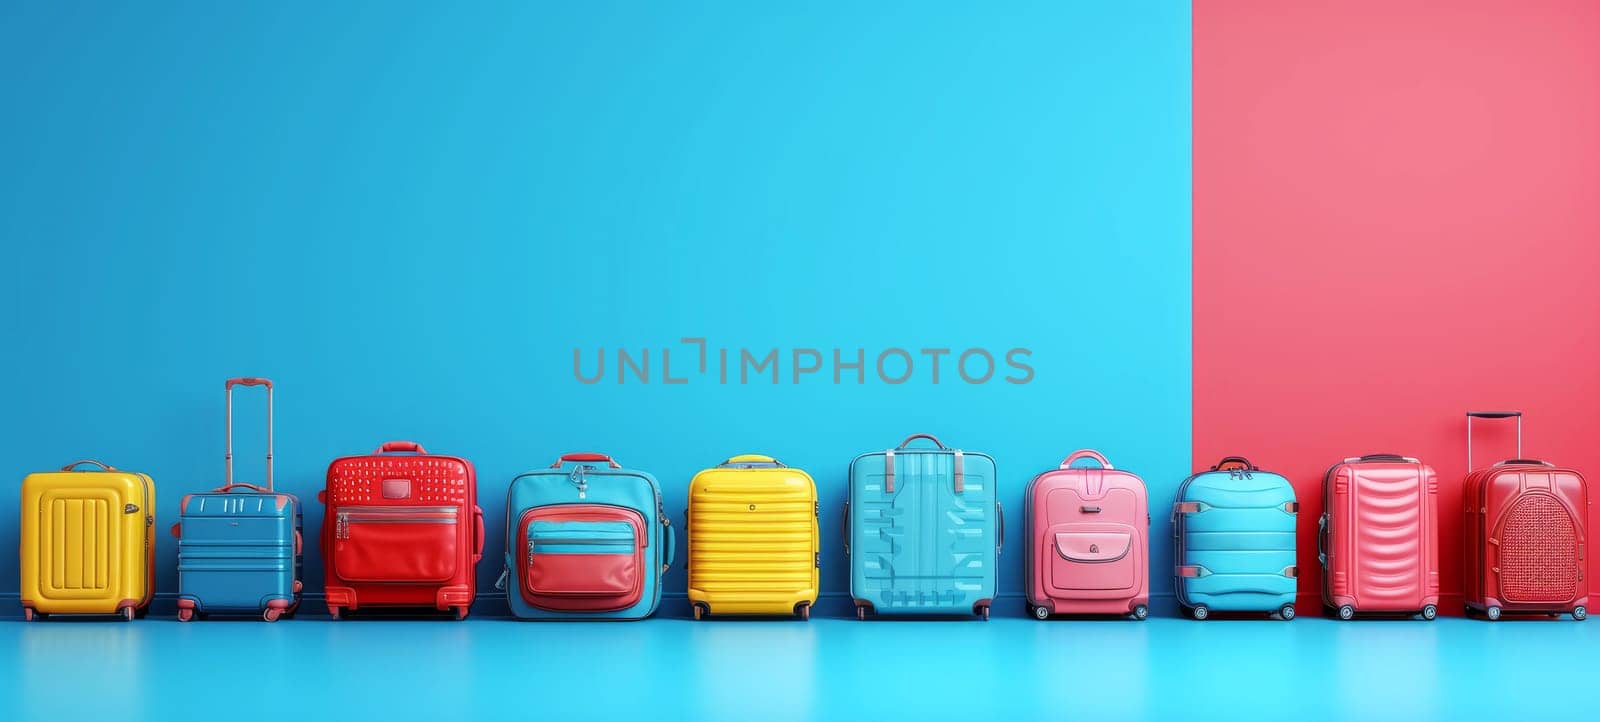 Blue, yellow and pink suitcases or travel bag in a row on a blue and pink background by NataliPopova